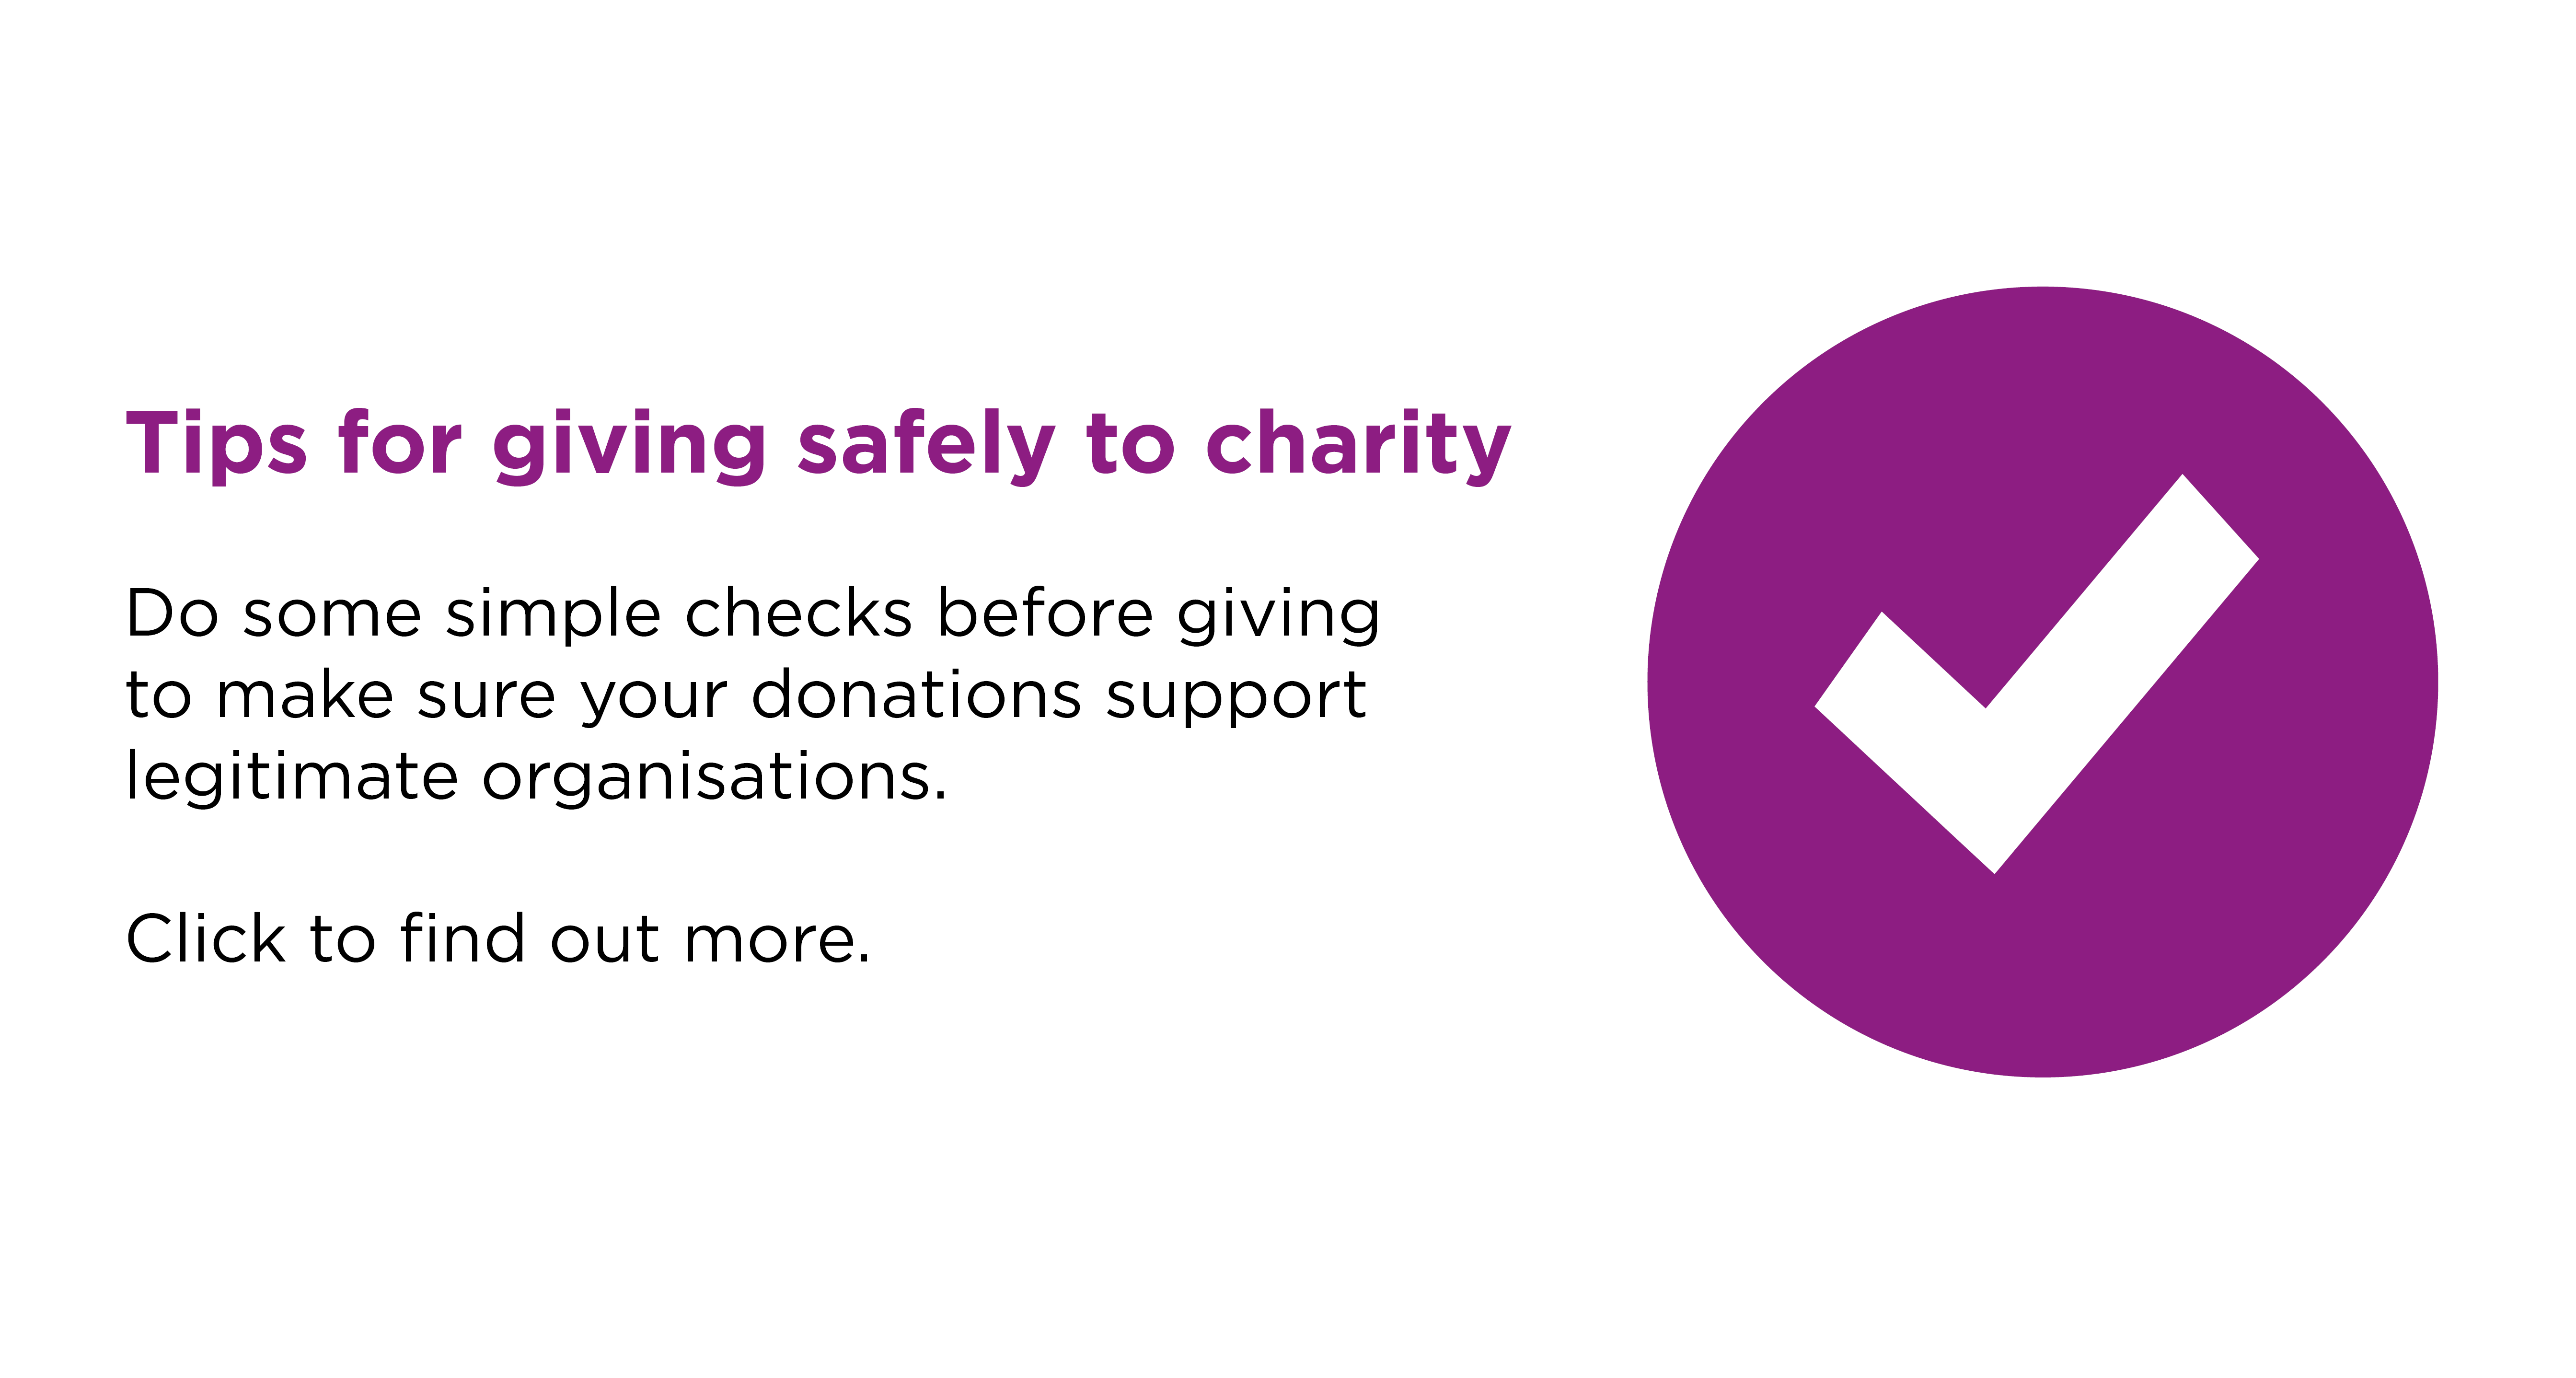 Tips for giving safely to charity